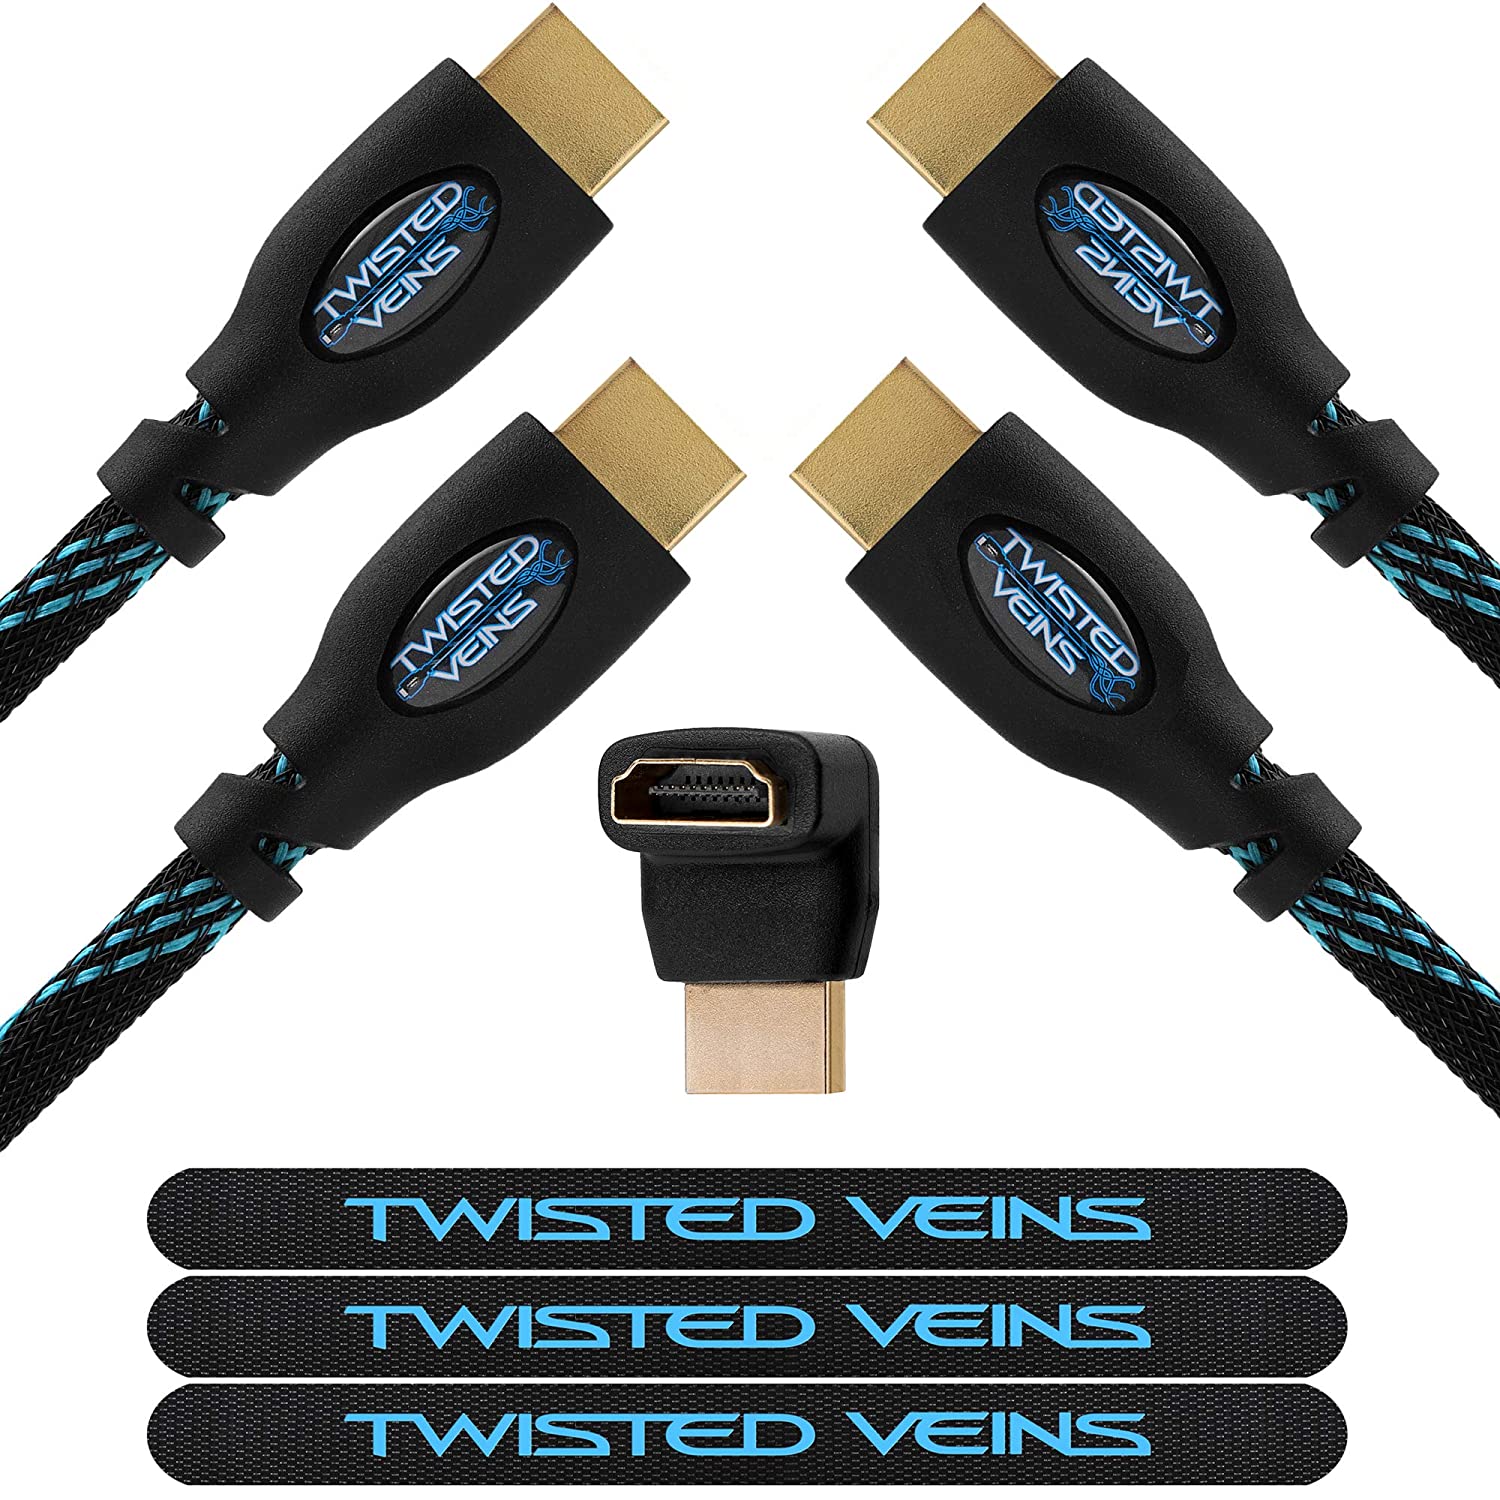  4. Twisted Veins HDMI Cable 25 ft 